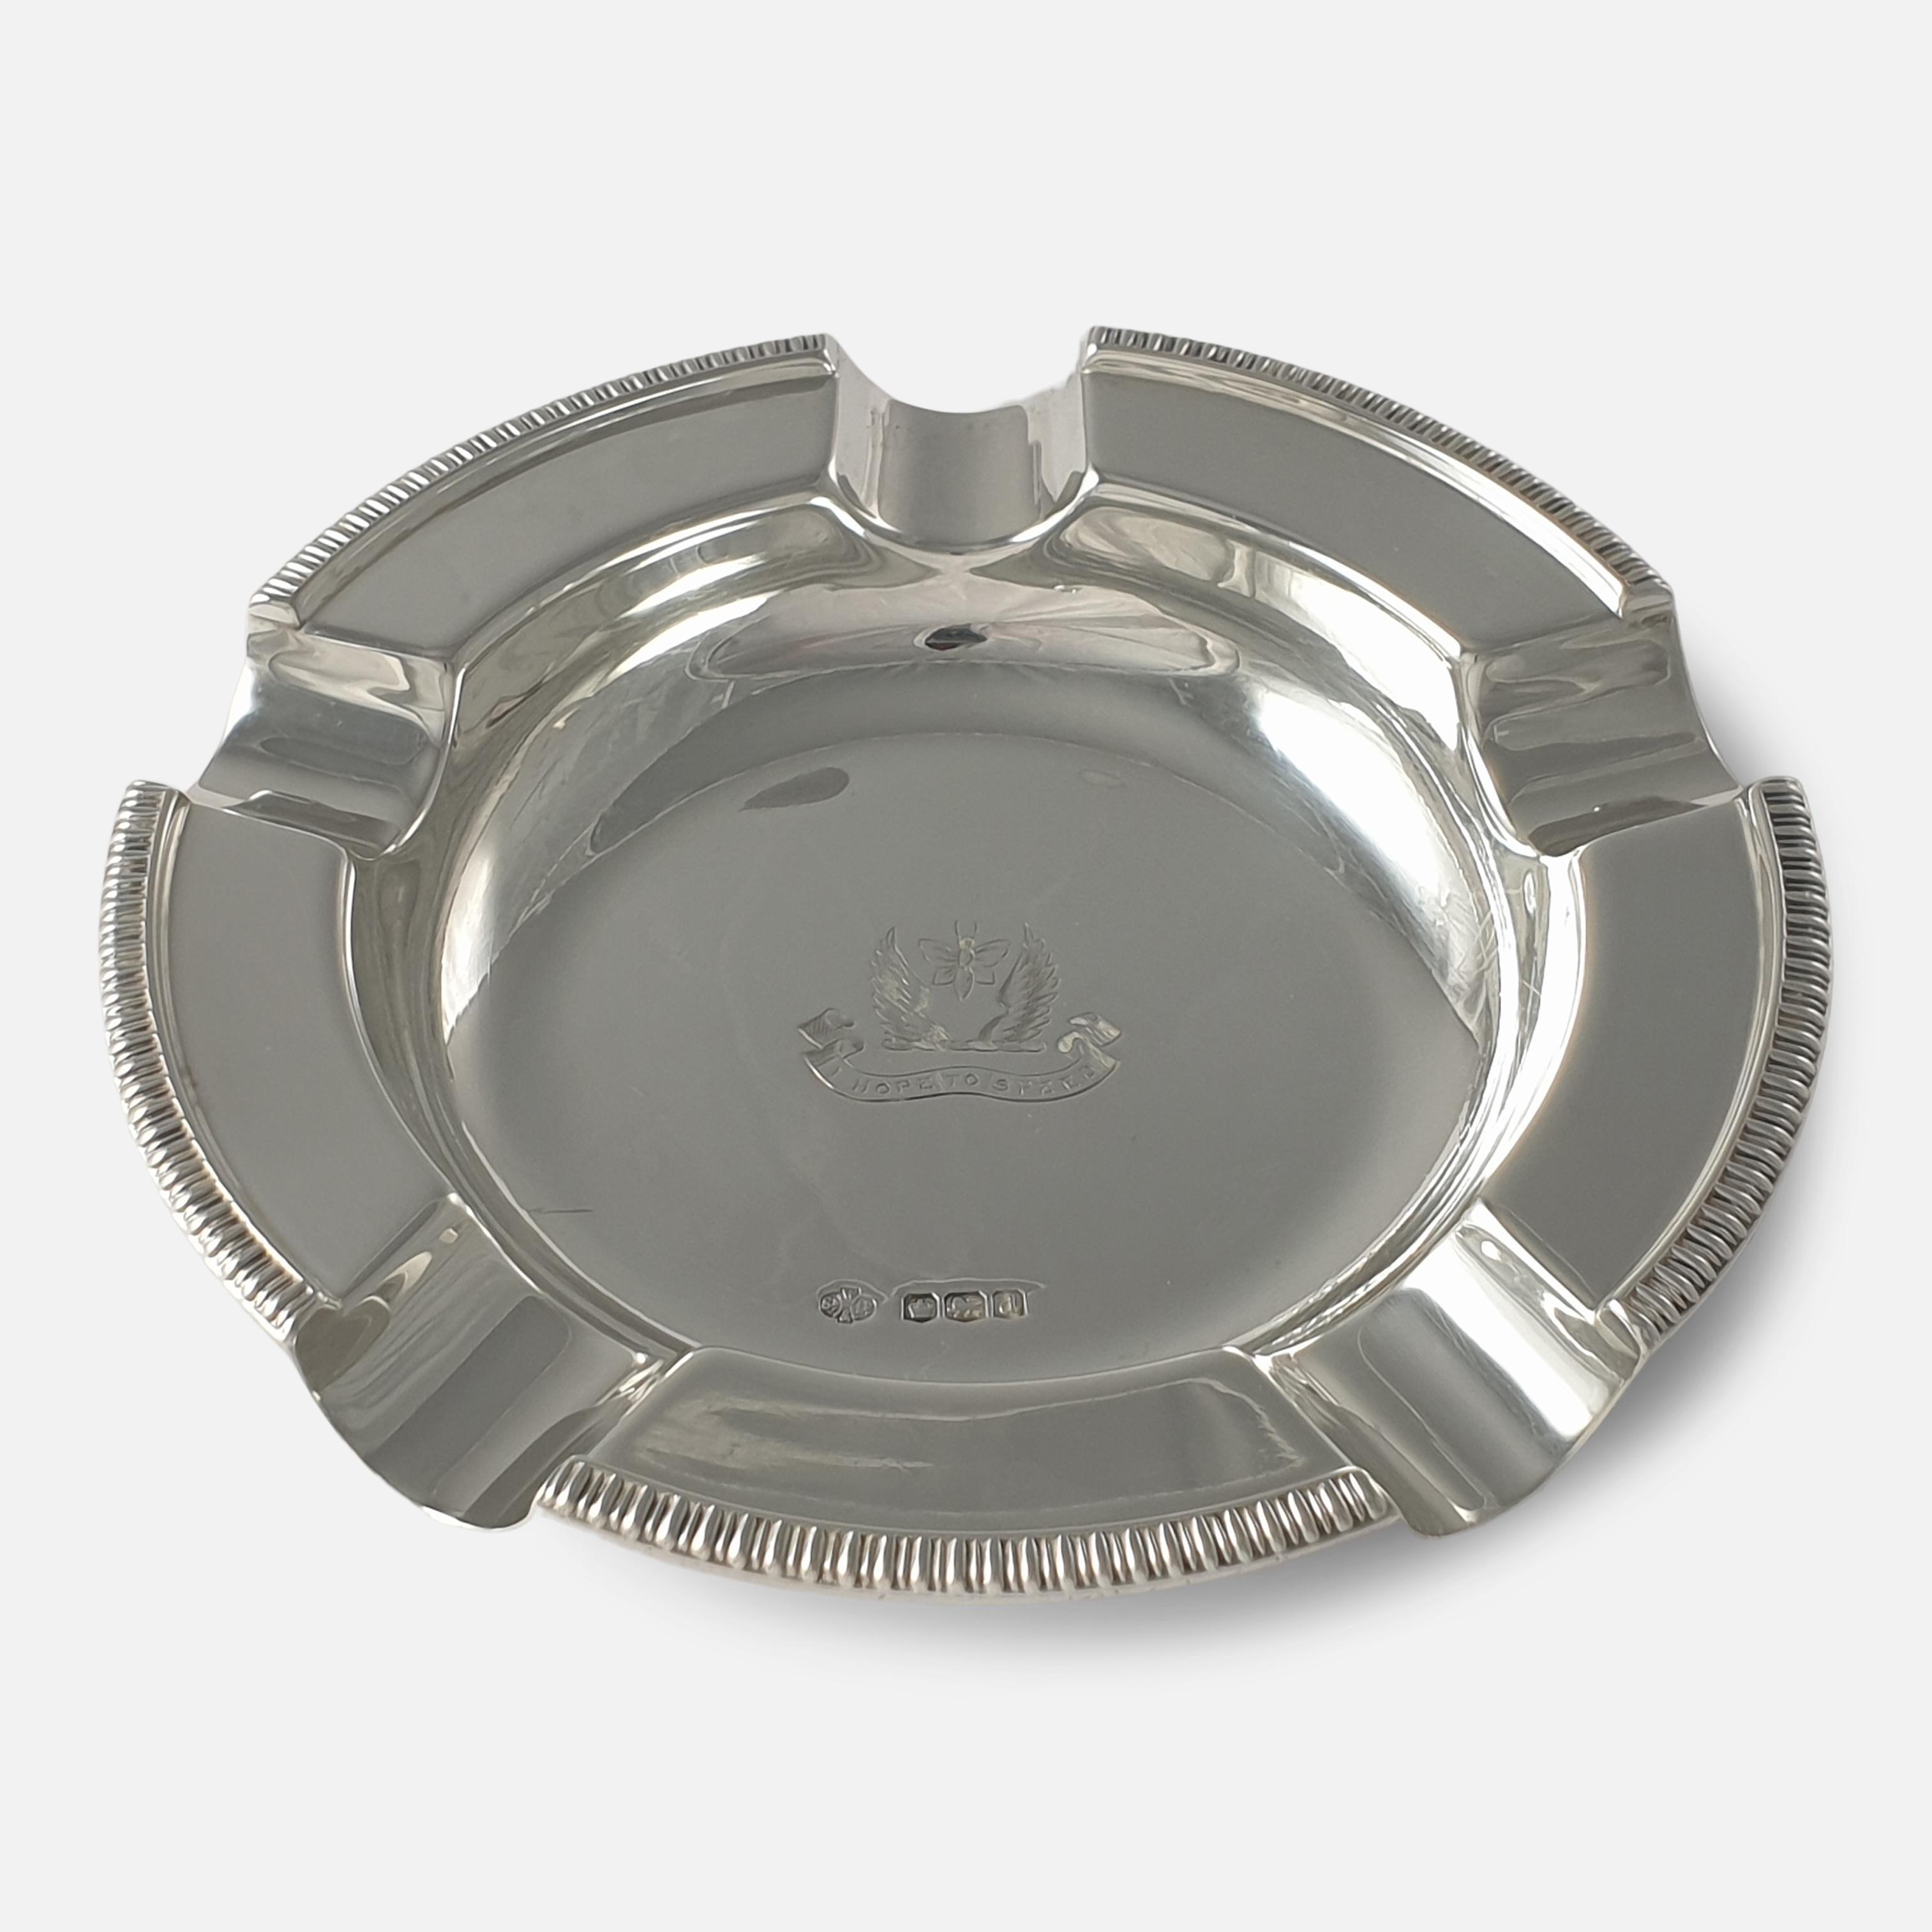 Pair of Sterling Silver Crested Ashtrays, William Hutton & Sons For Sale 3